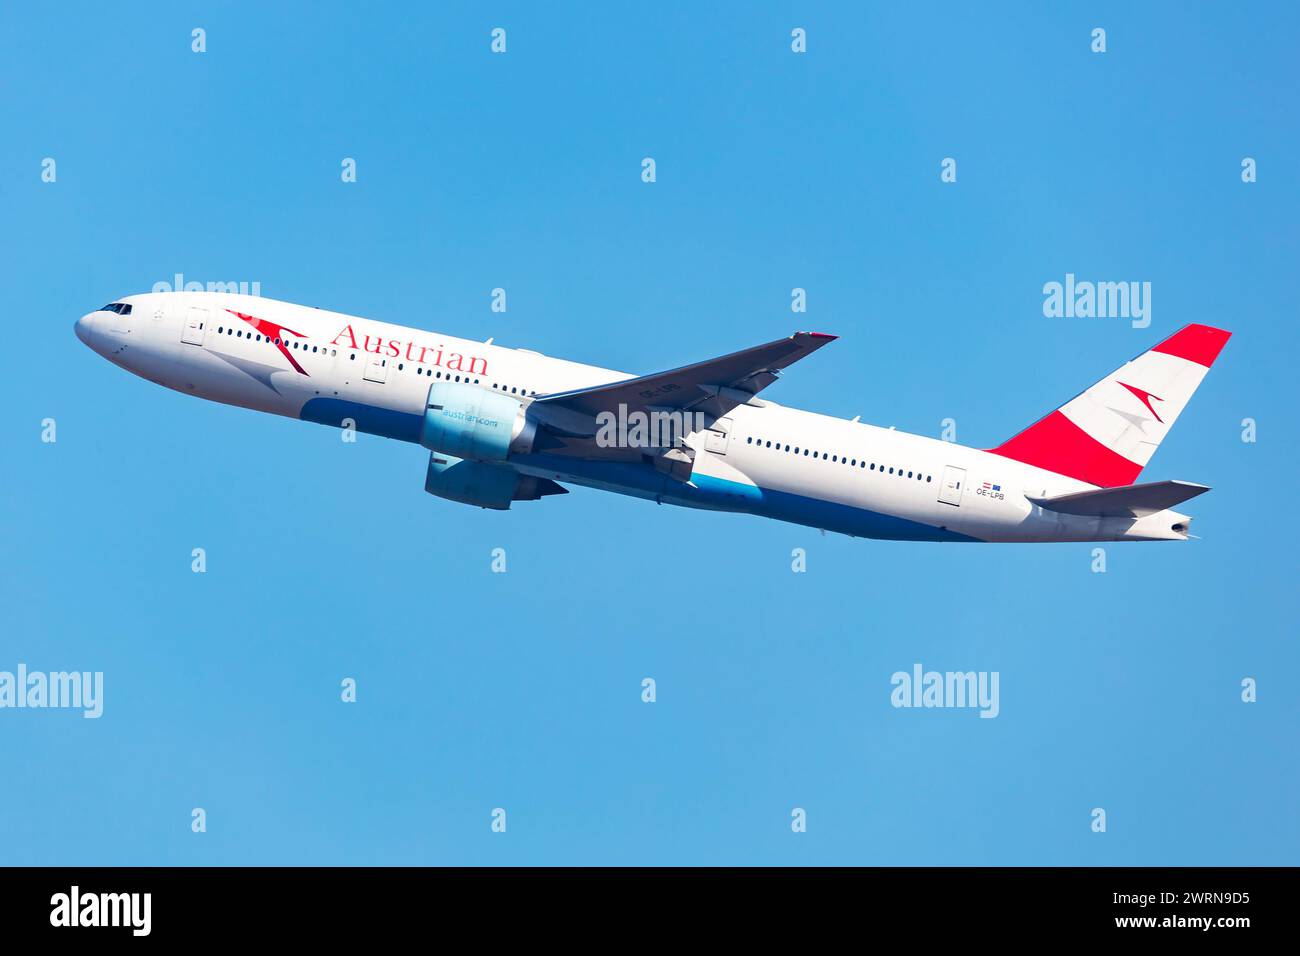 Vienna, Austria - October 14, 2023: Austrian Airlines Boeing 777-200 passenger plane at airport. Aviation and aircraft. Air transport and travel. Tran Stock Photo